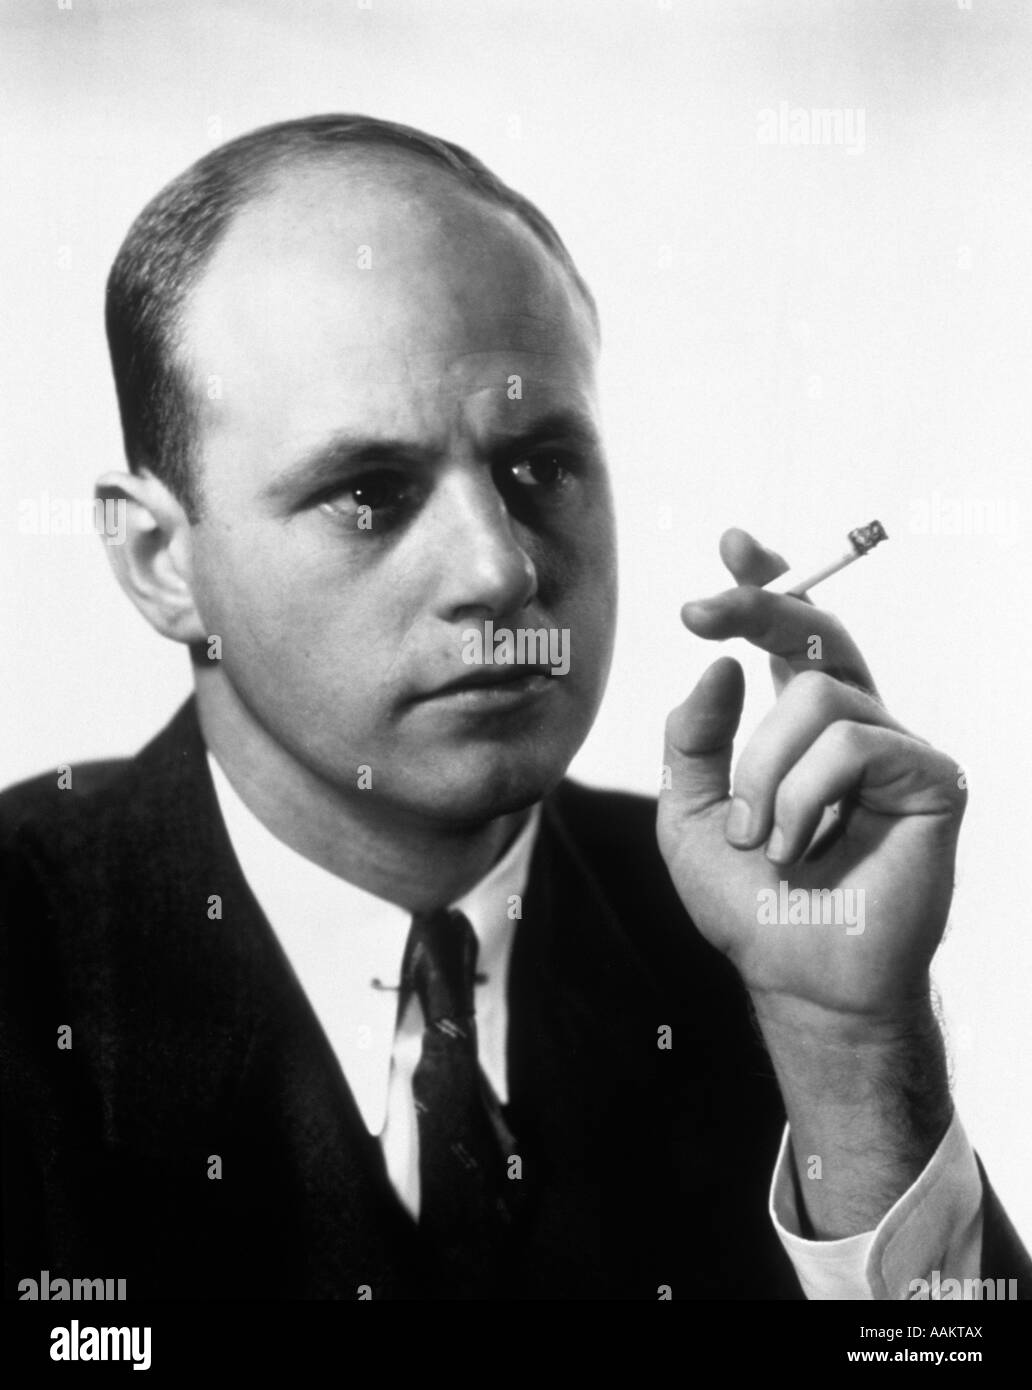 1960s PORTRAIT OF MAN SMOKING HOLDING A CIGARETTE Stock Photo